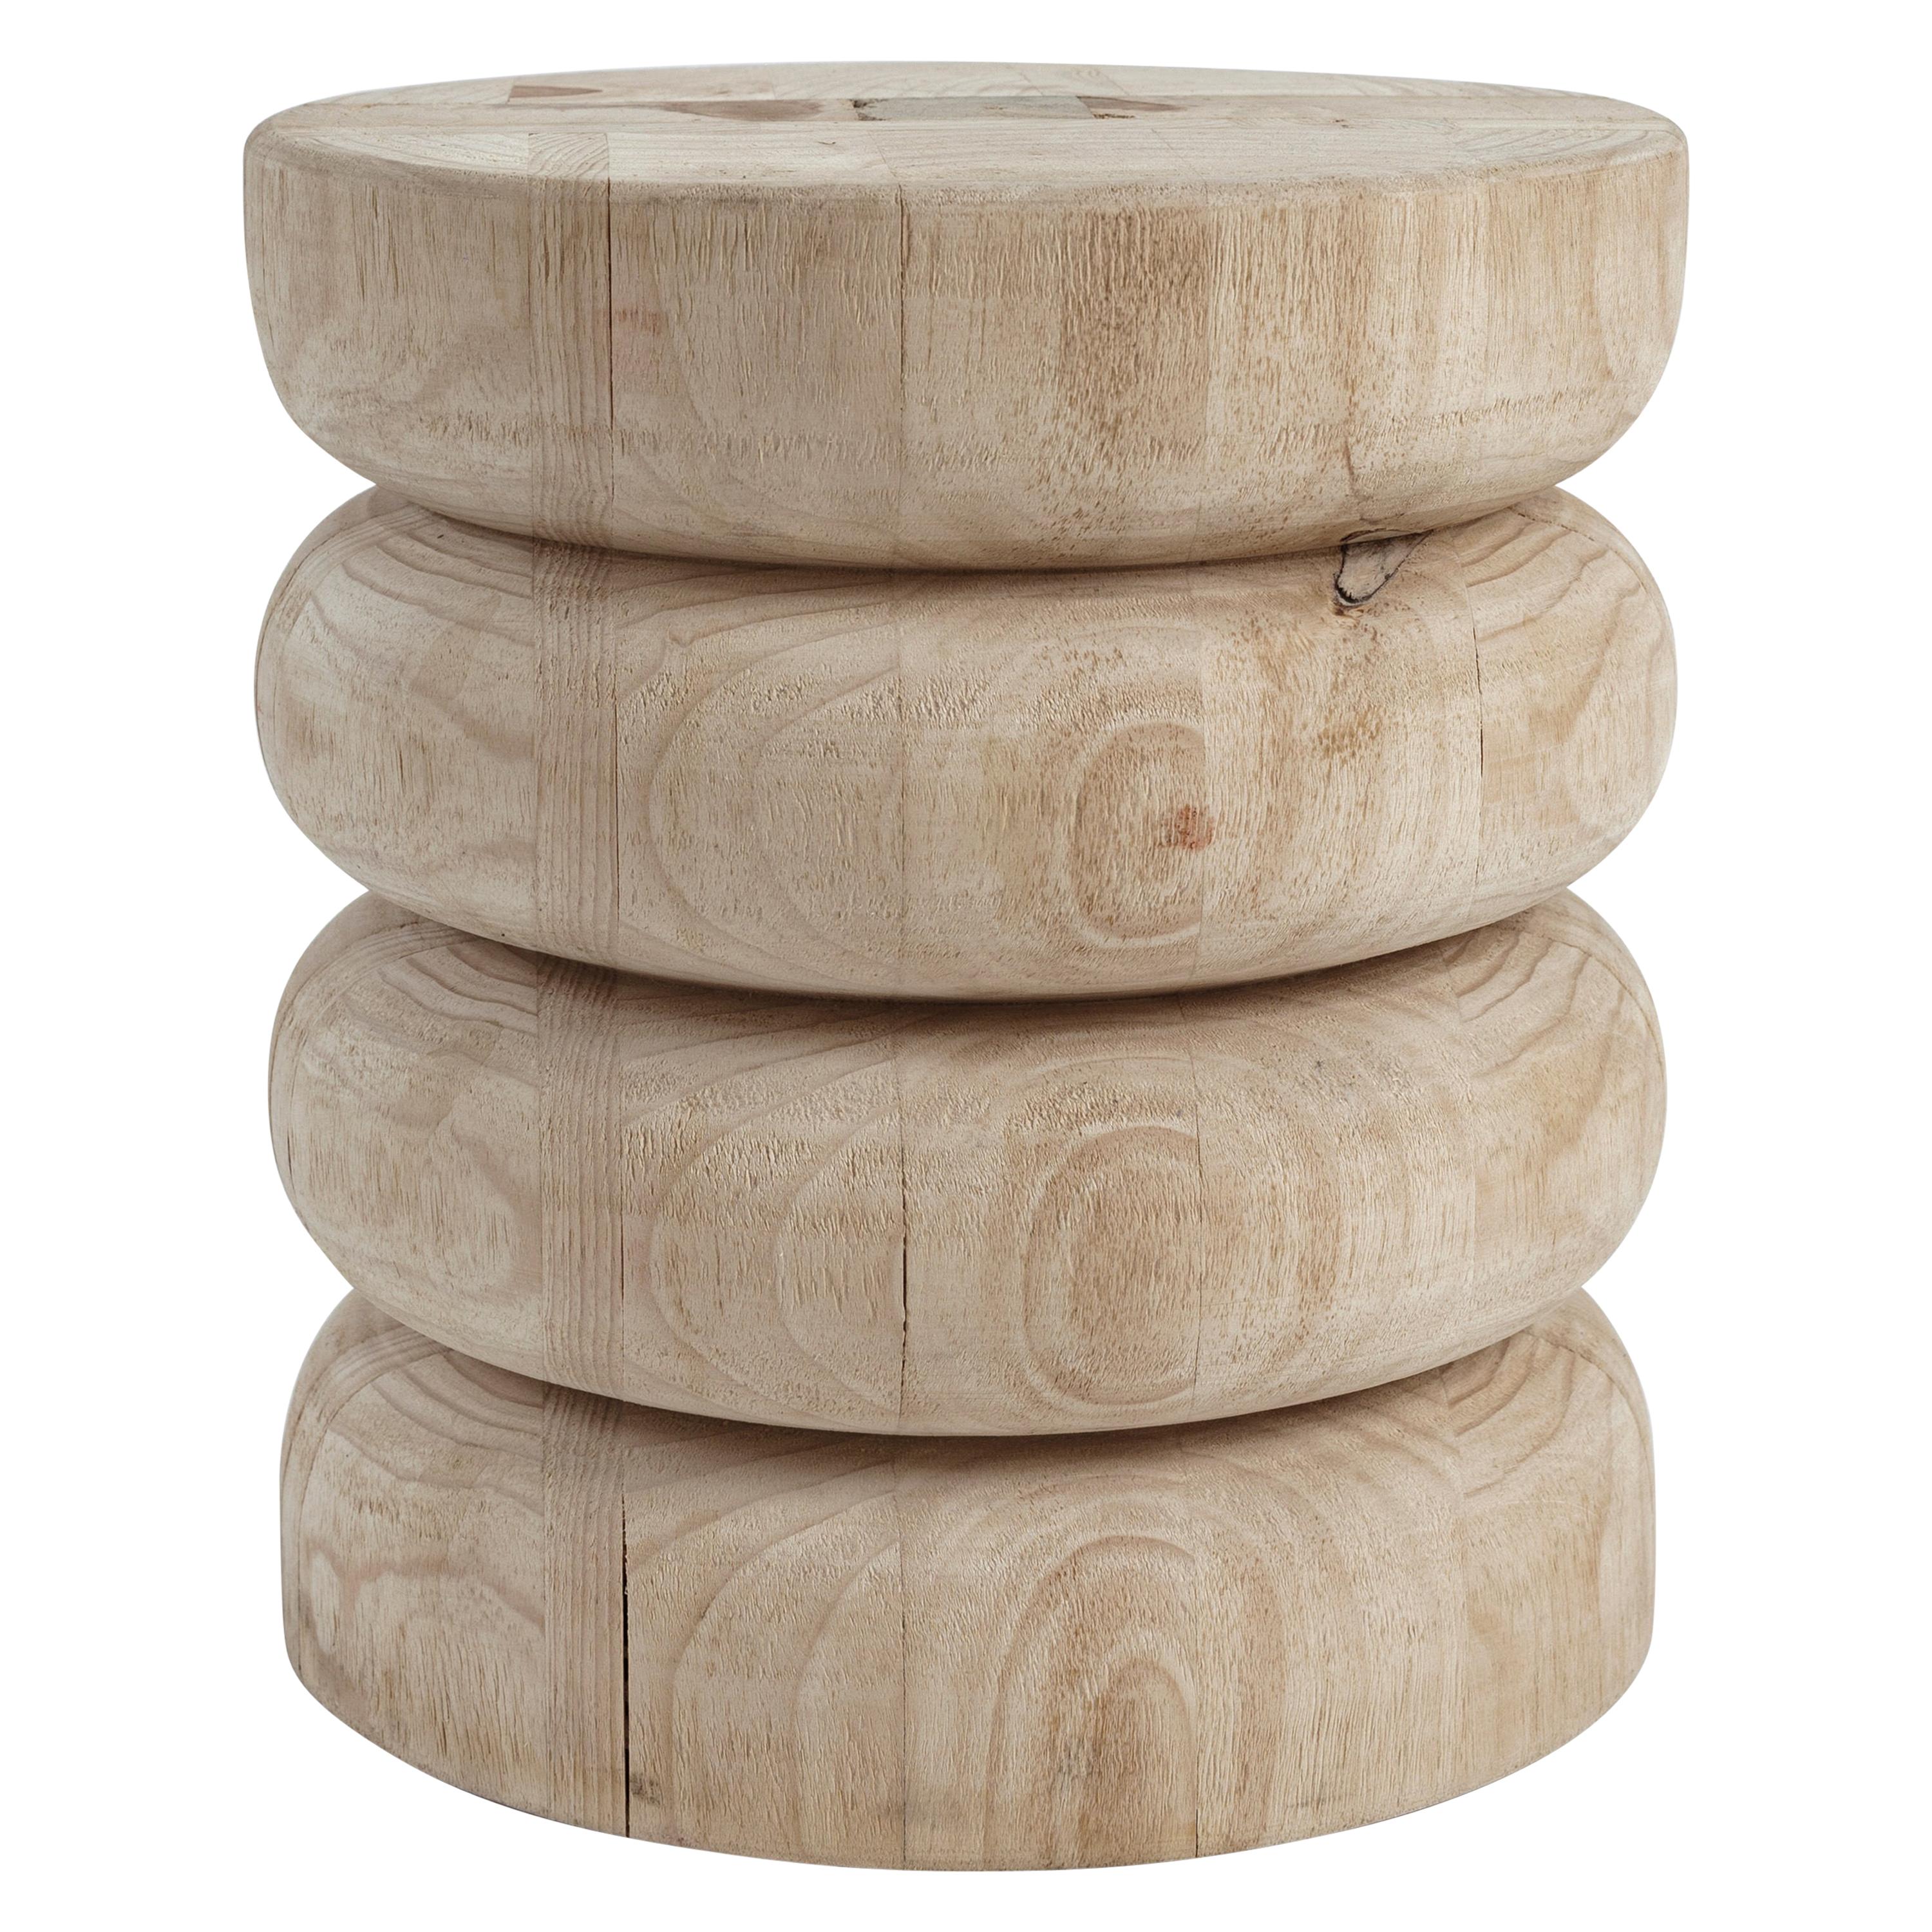 NERU TOTEM STOOL 5, Radiata Wood Utility Sculpture by Rebeca Cors For Sale